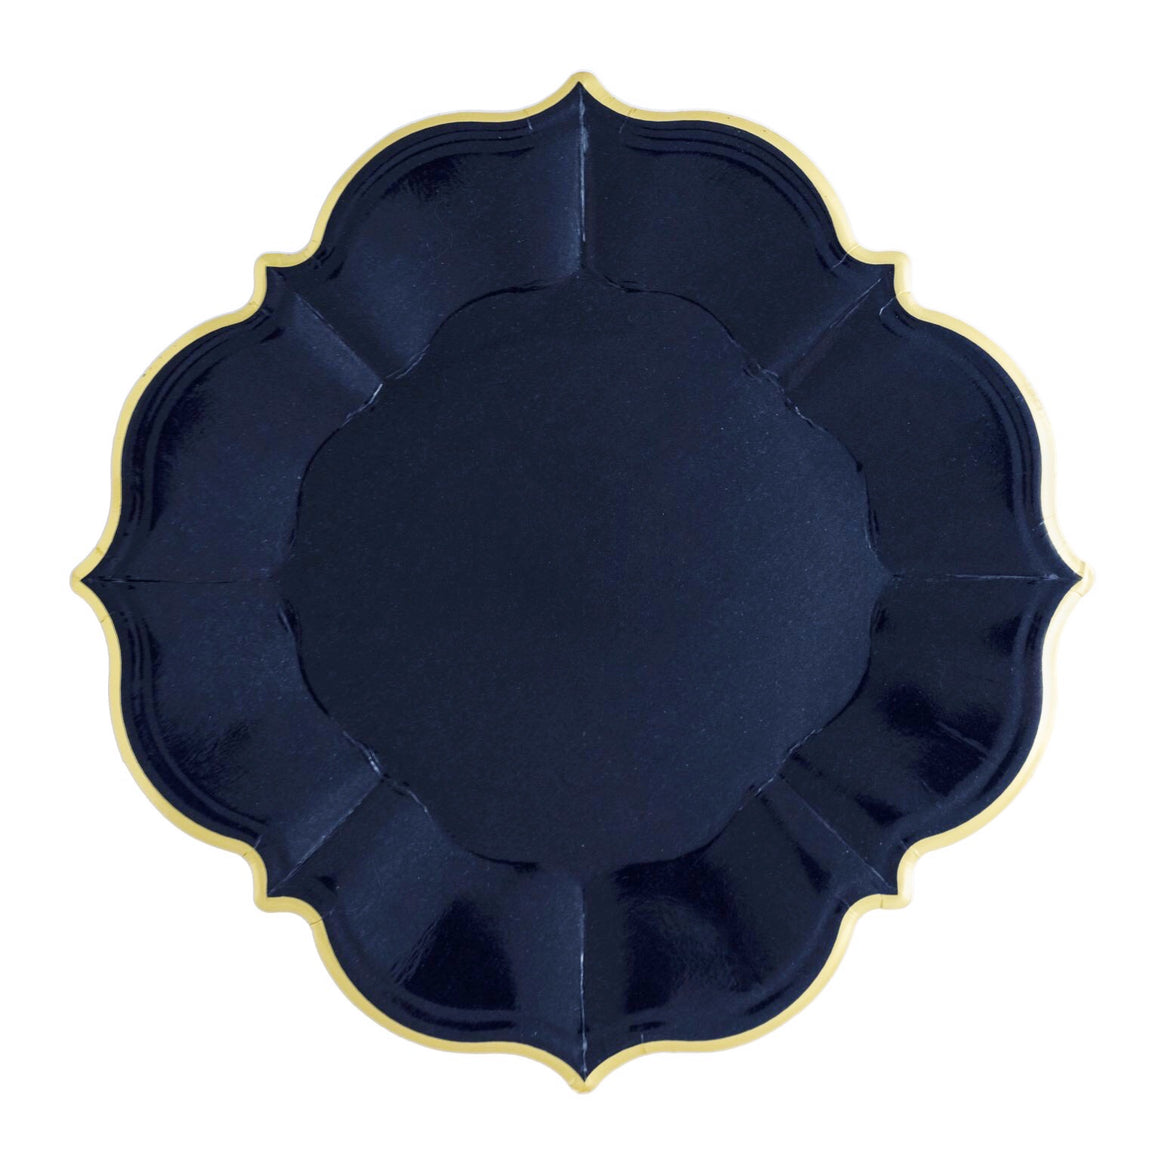 PLATES LARGE - BLUE NAVY LUNCHEON SCALLOPED